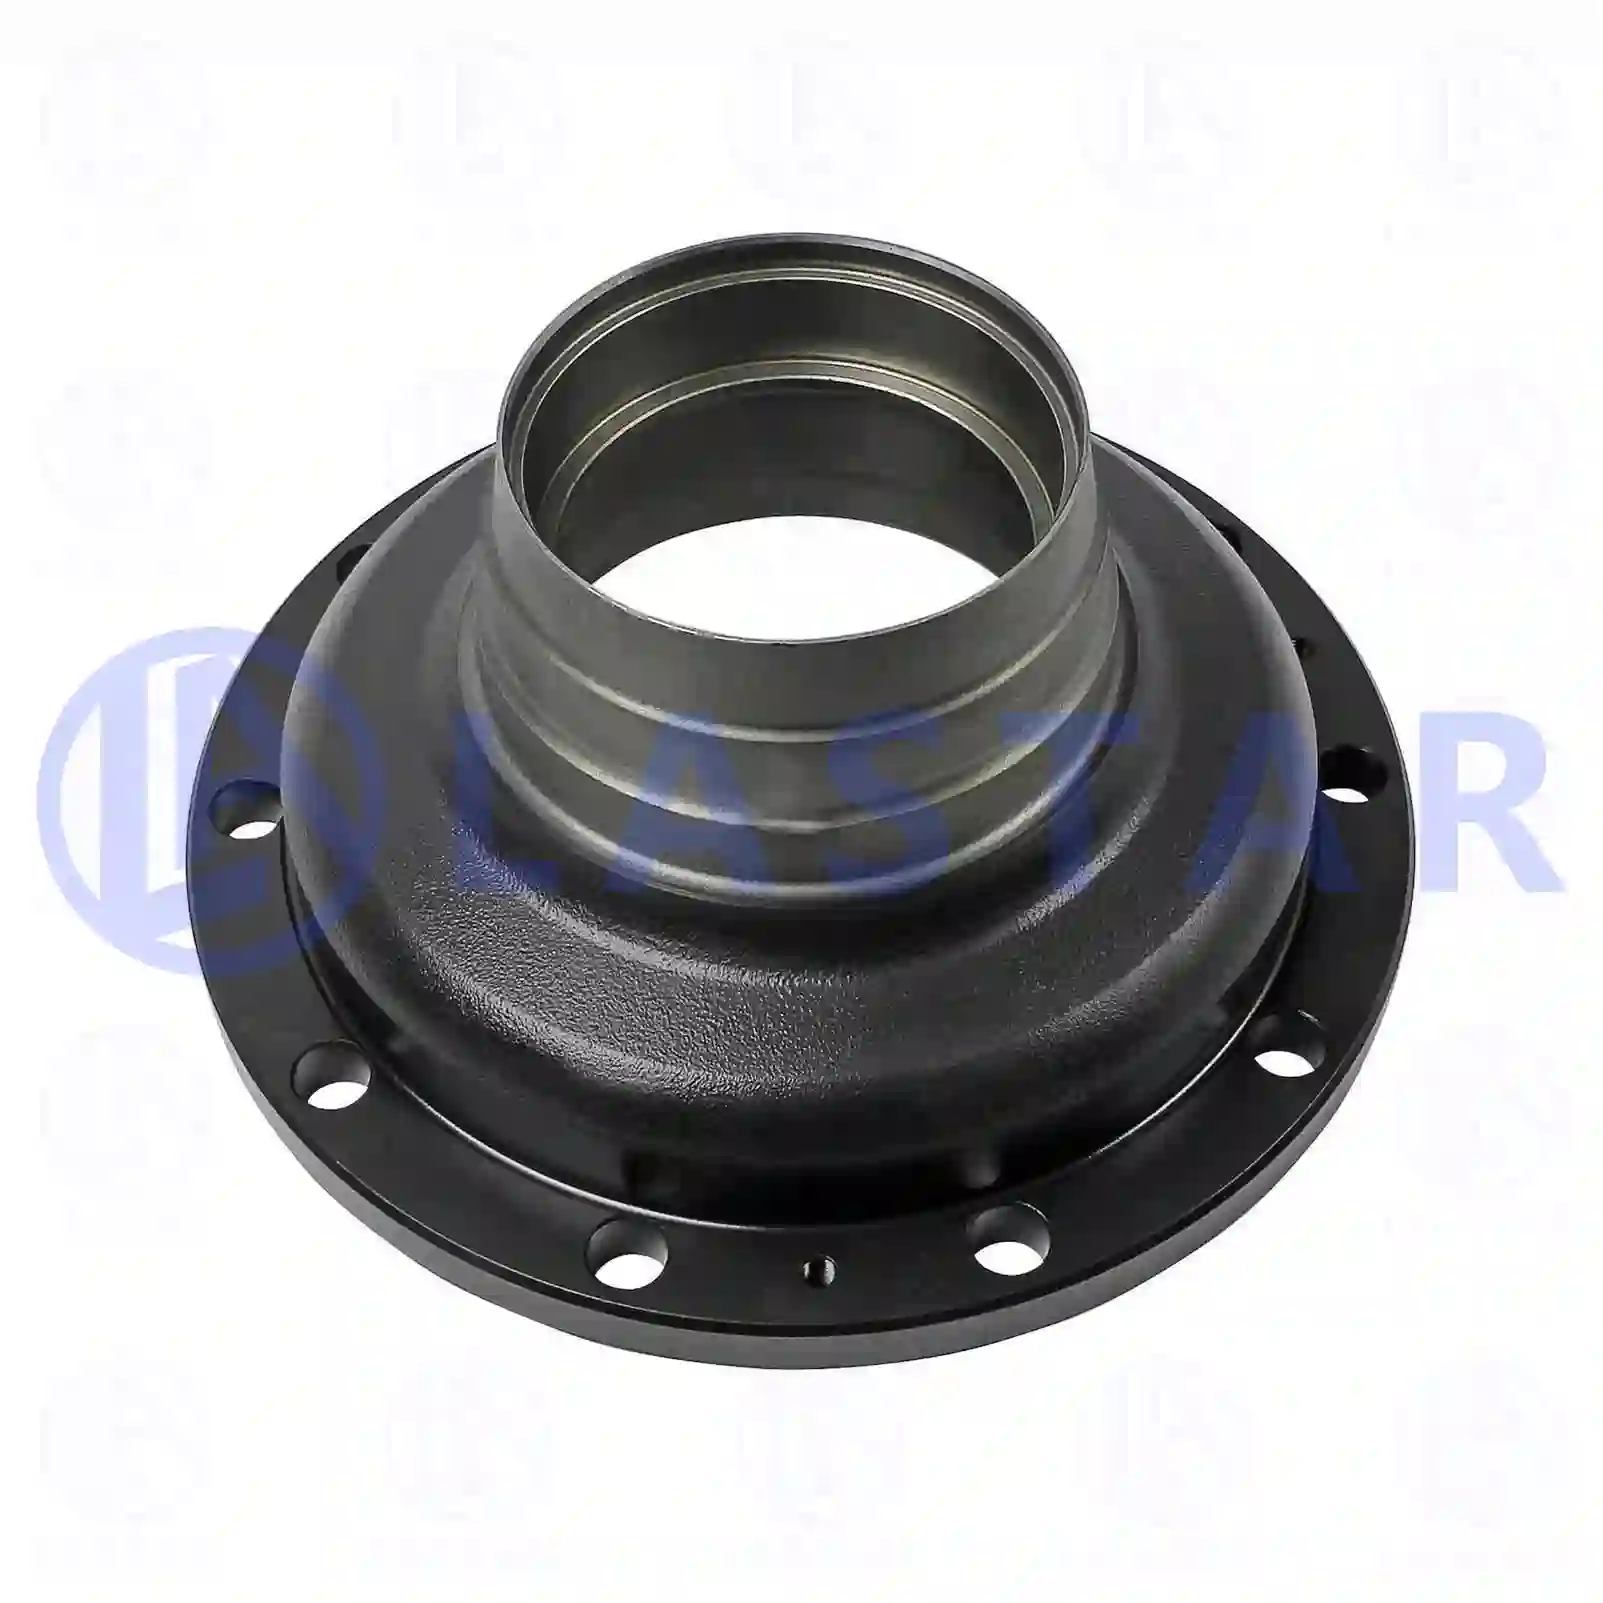 Wheel hub, without bearings, 77726686, 42115016, ZG30237-0008, , , , ||  77726686 Lastar Spare Part | Truck Spare Parts, Auotomotive Spare Parts Wheel hub, without bearings, 77726686, 42115016, ZG30237-0008, , , , ||  77726686 Lastar Spare Part | Truck Spare Parts, Auotomotive Spare Parts